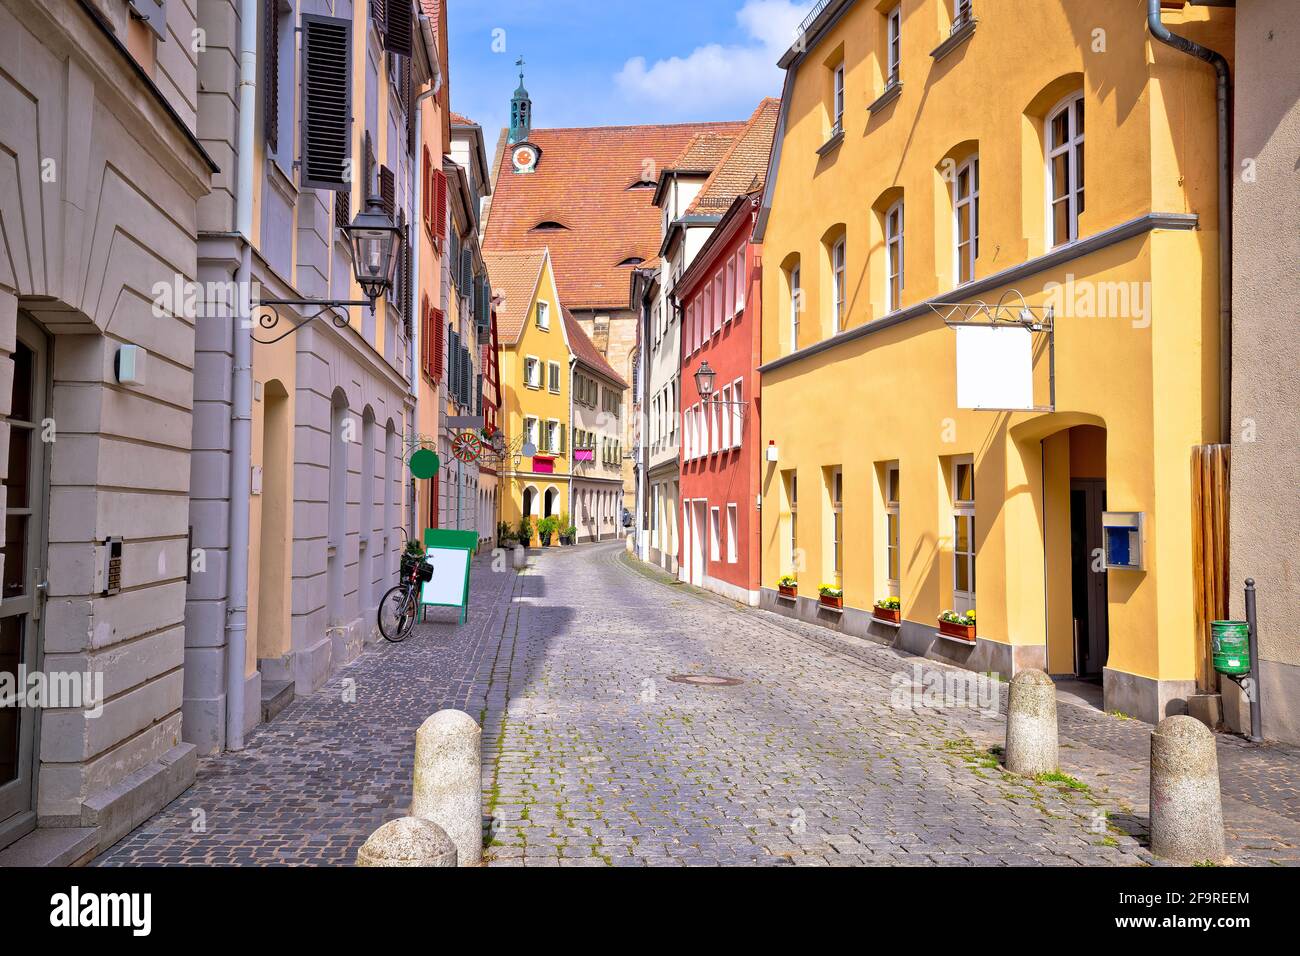 Ansbach. Old town of Ansbach picturesque cobbled street view, Bavaria region of Germany Stock Photo